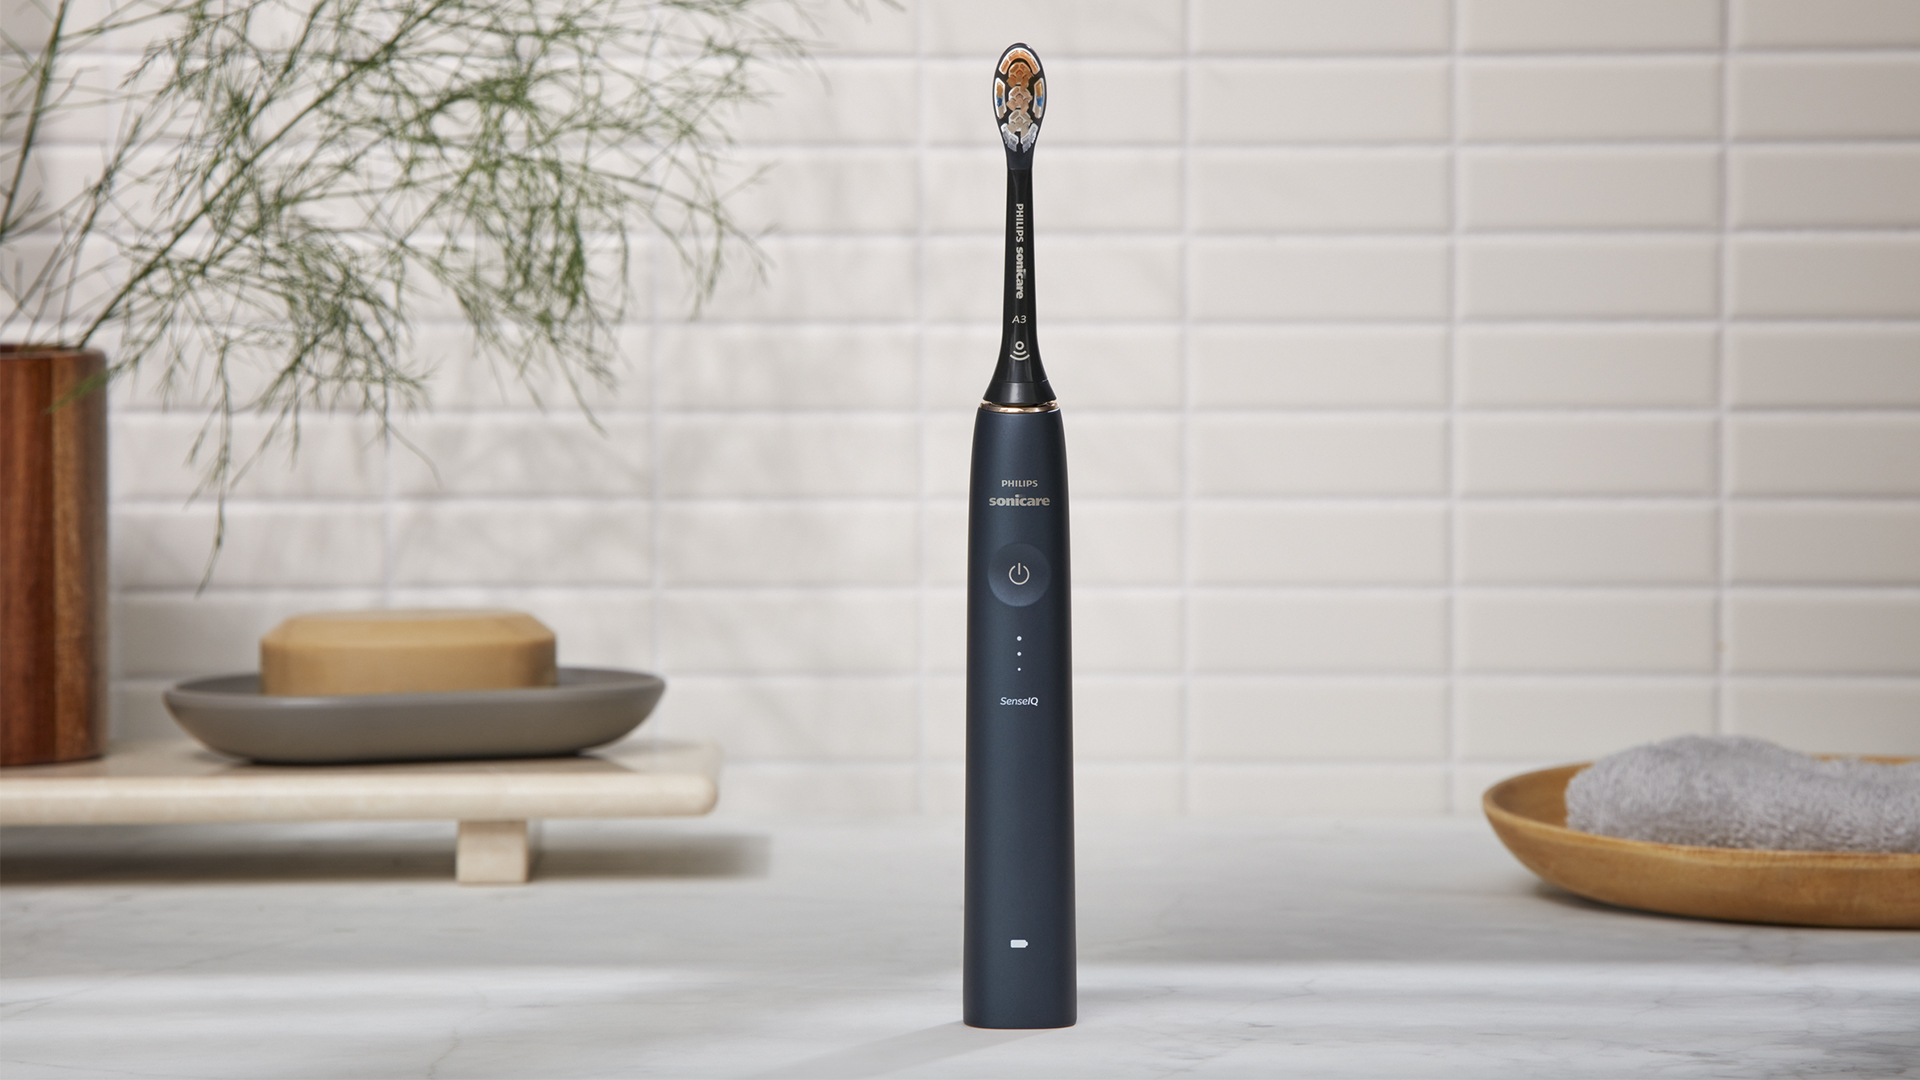 This Toothbrush Could Land Neil Armstrong On The Moon, Probably